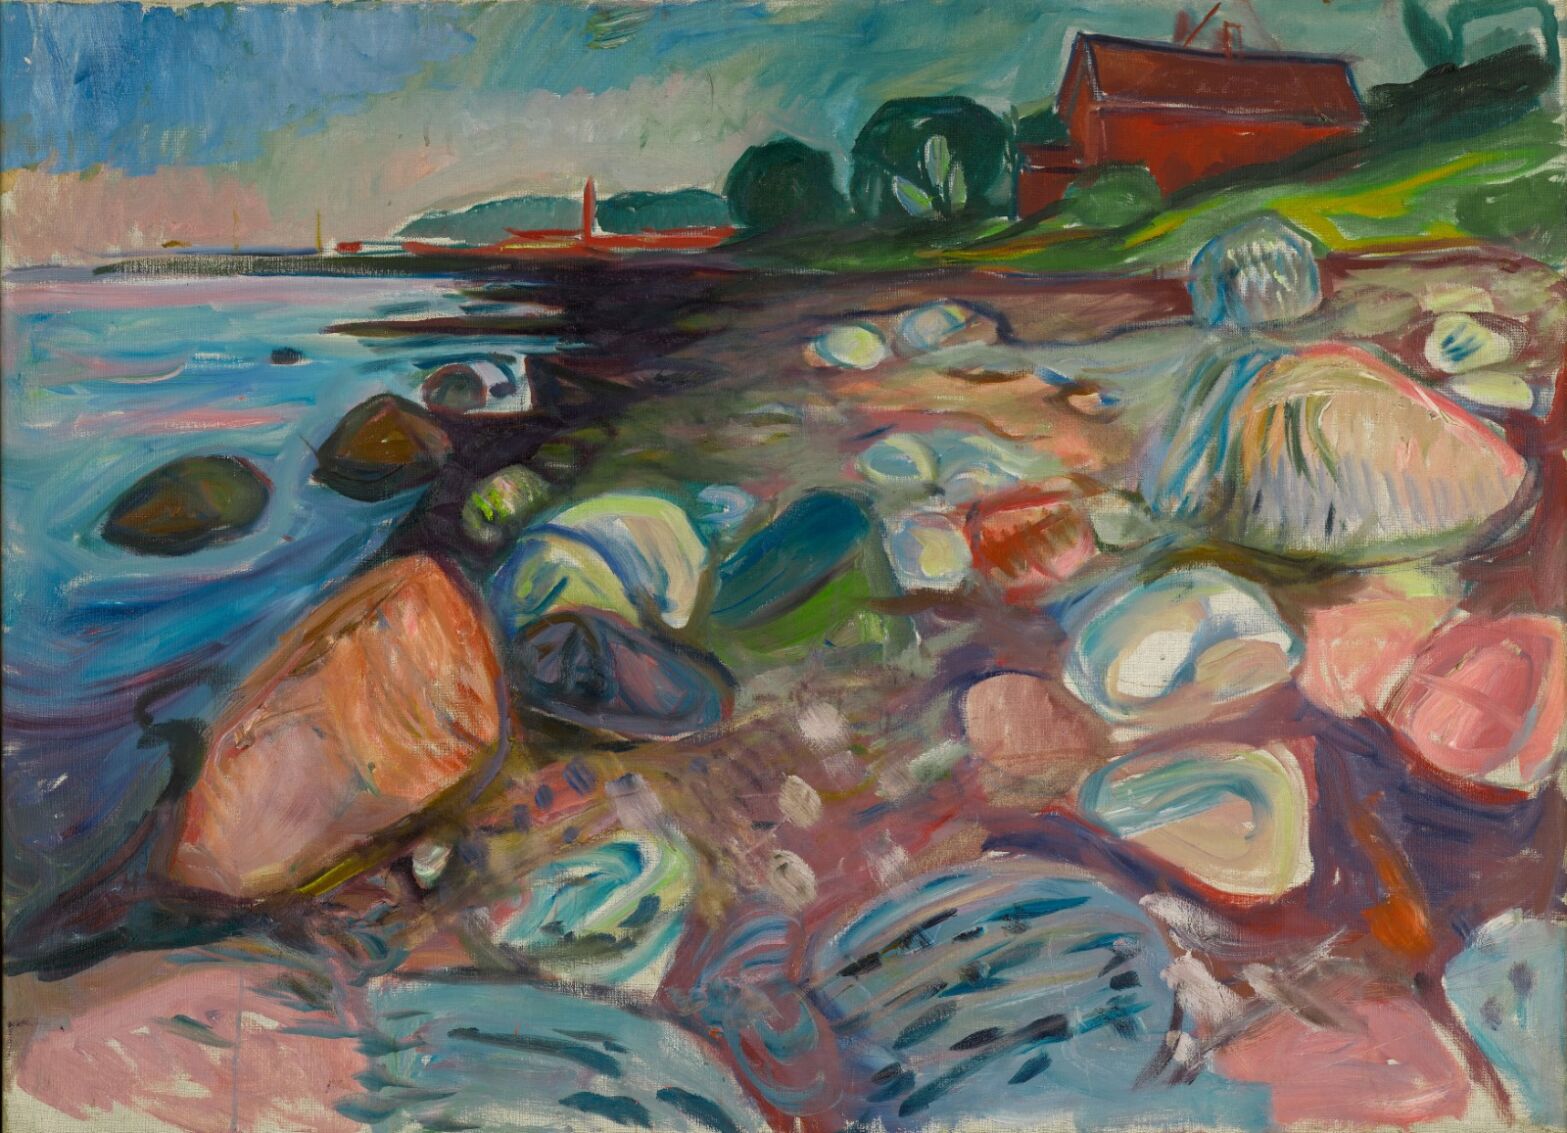 On View: Edvard Munch at The Clark Institute